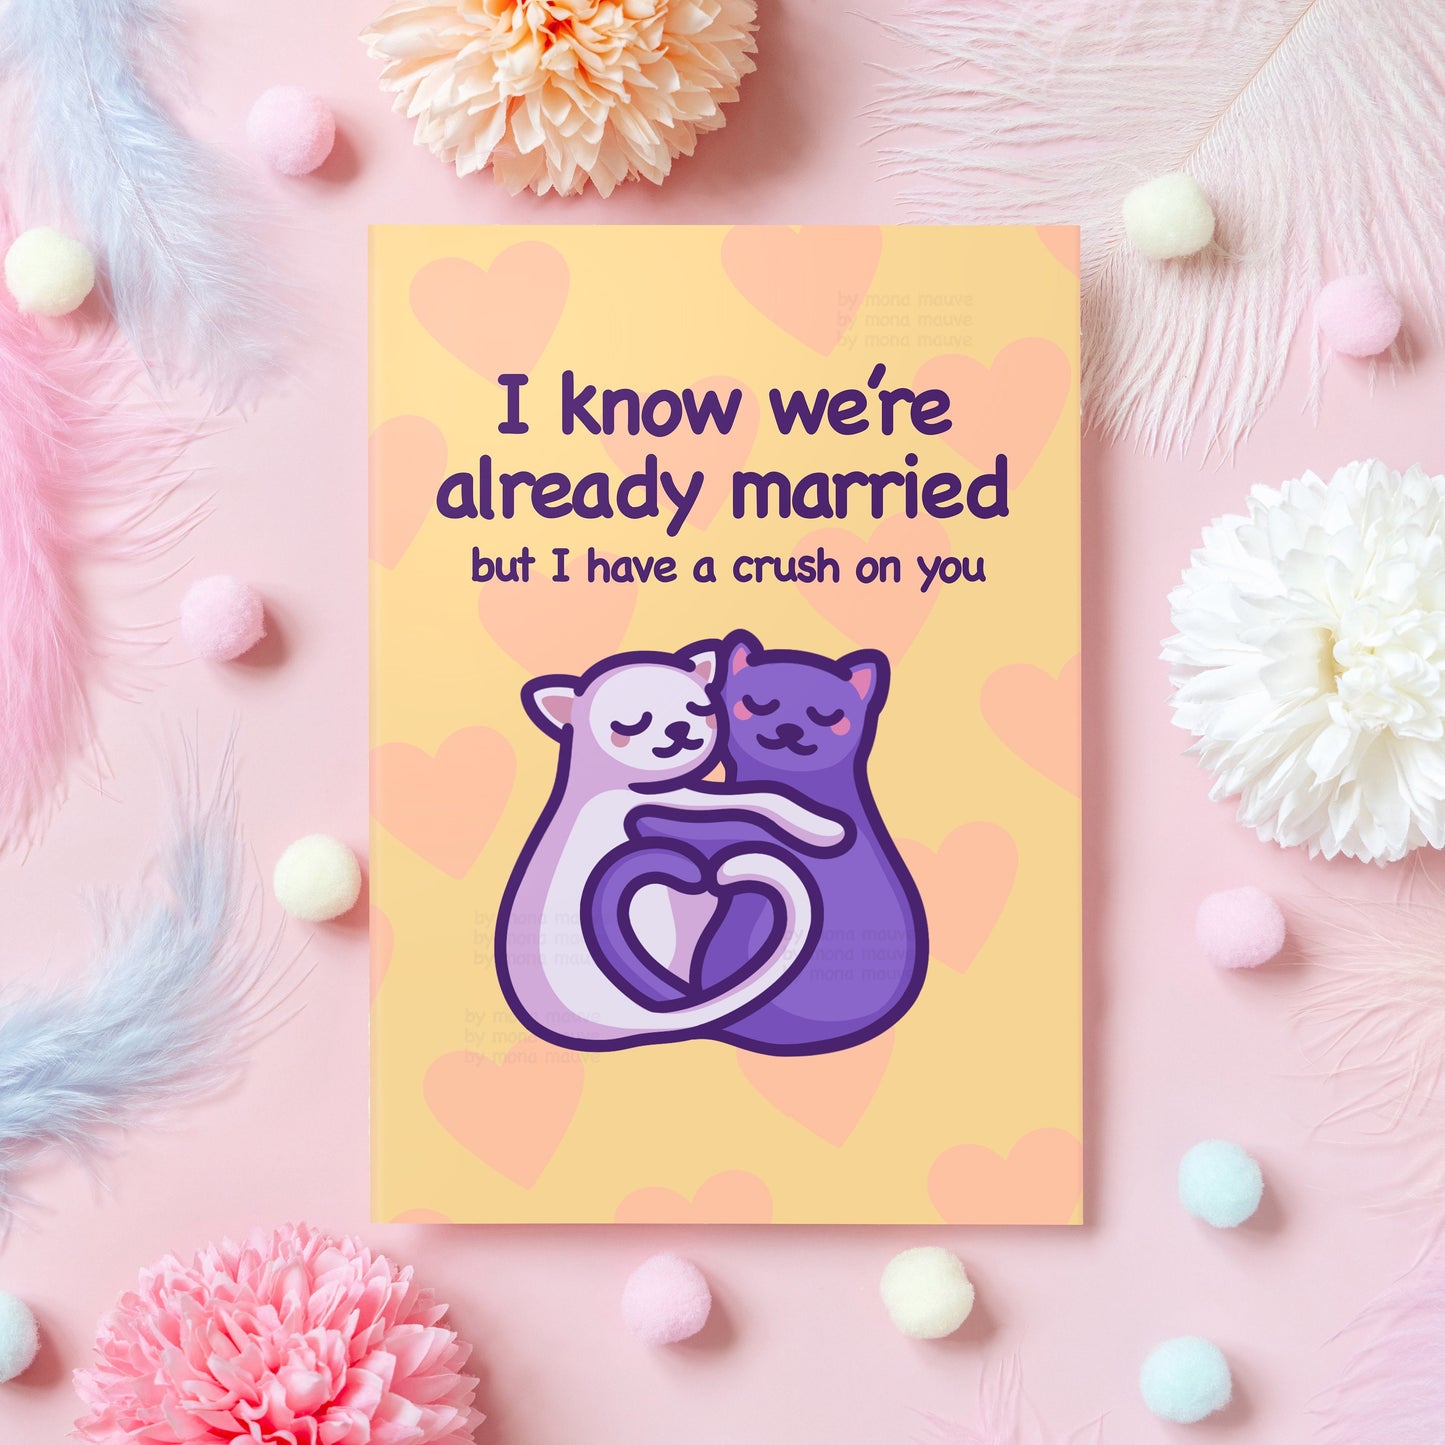 I Know We're Married, but I Have a Crush on You | Funny Anniversary Card